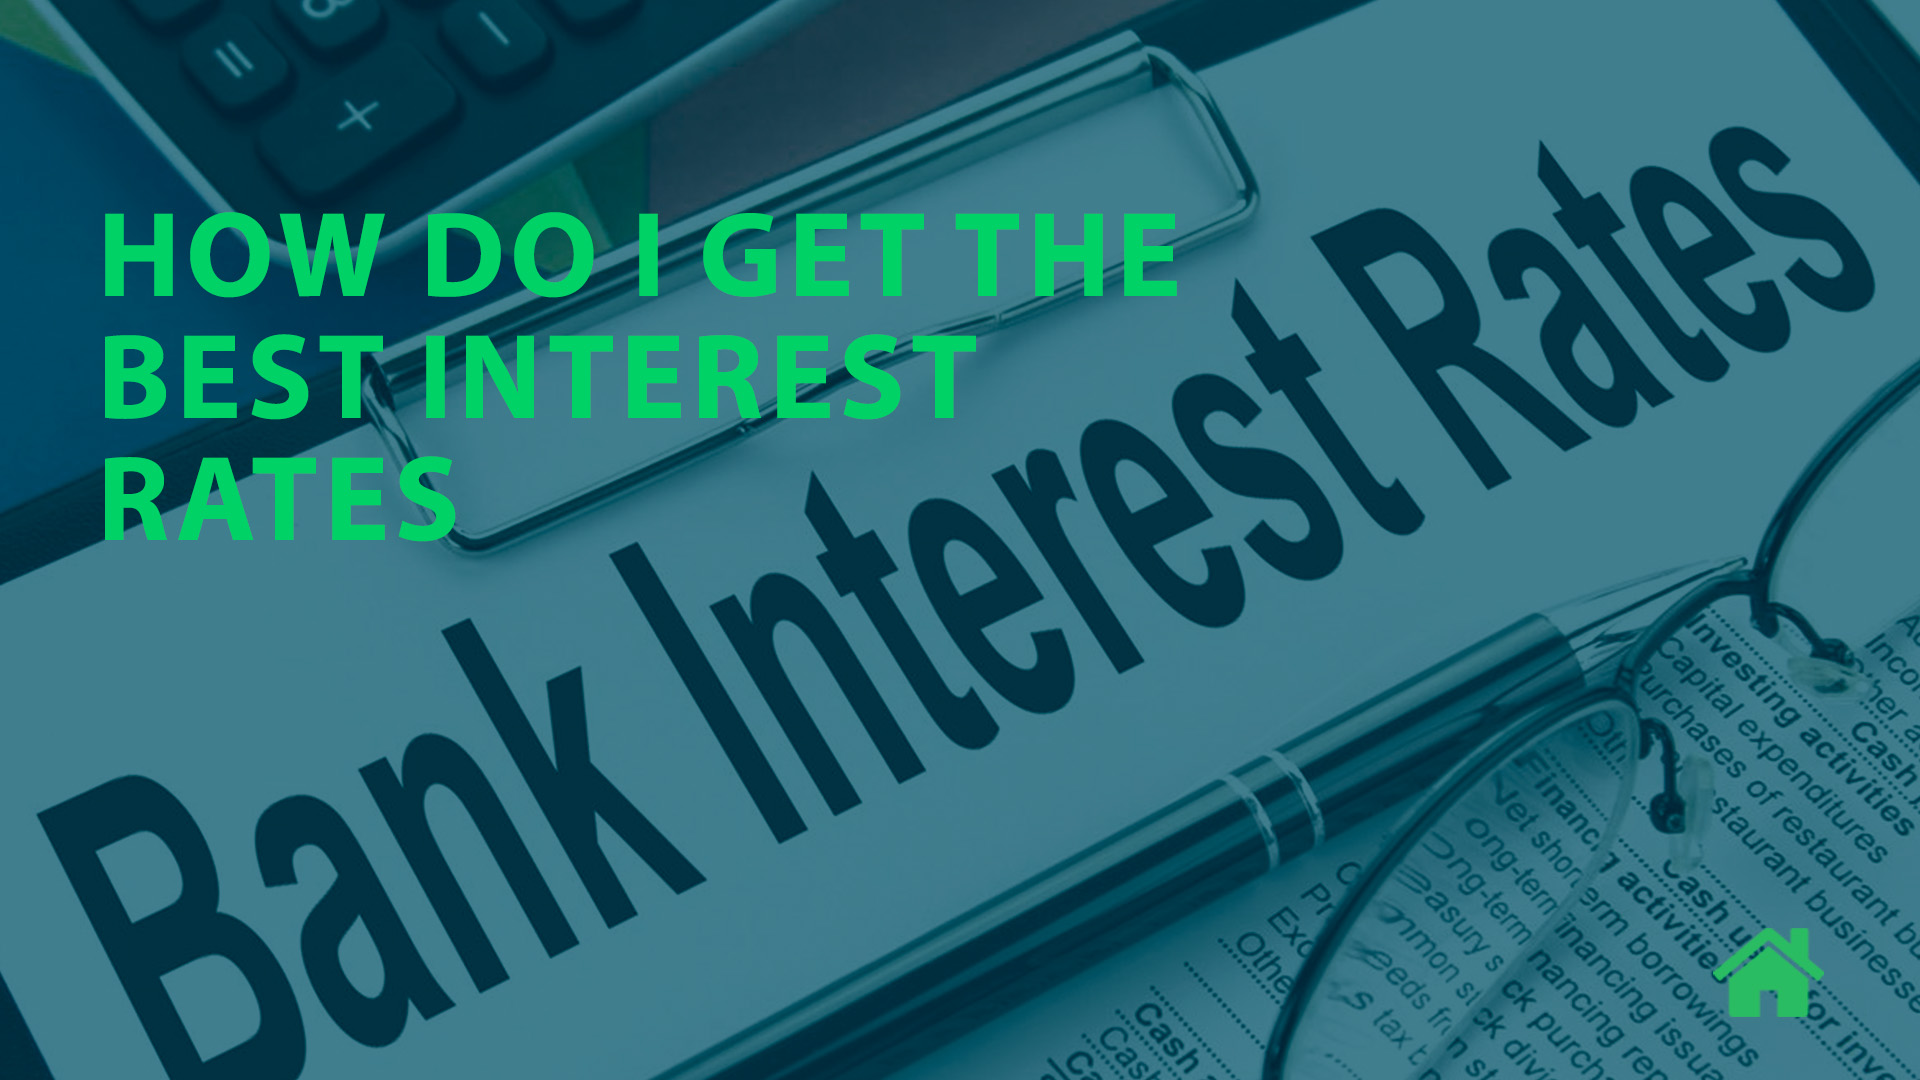 How do I get the best interest rates - Mortgage Help